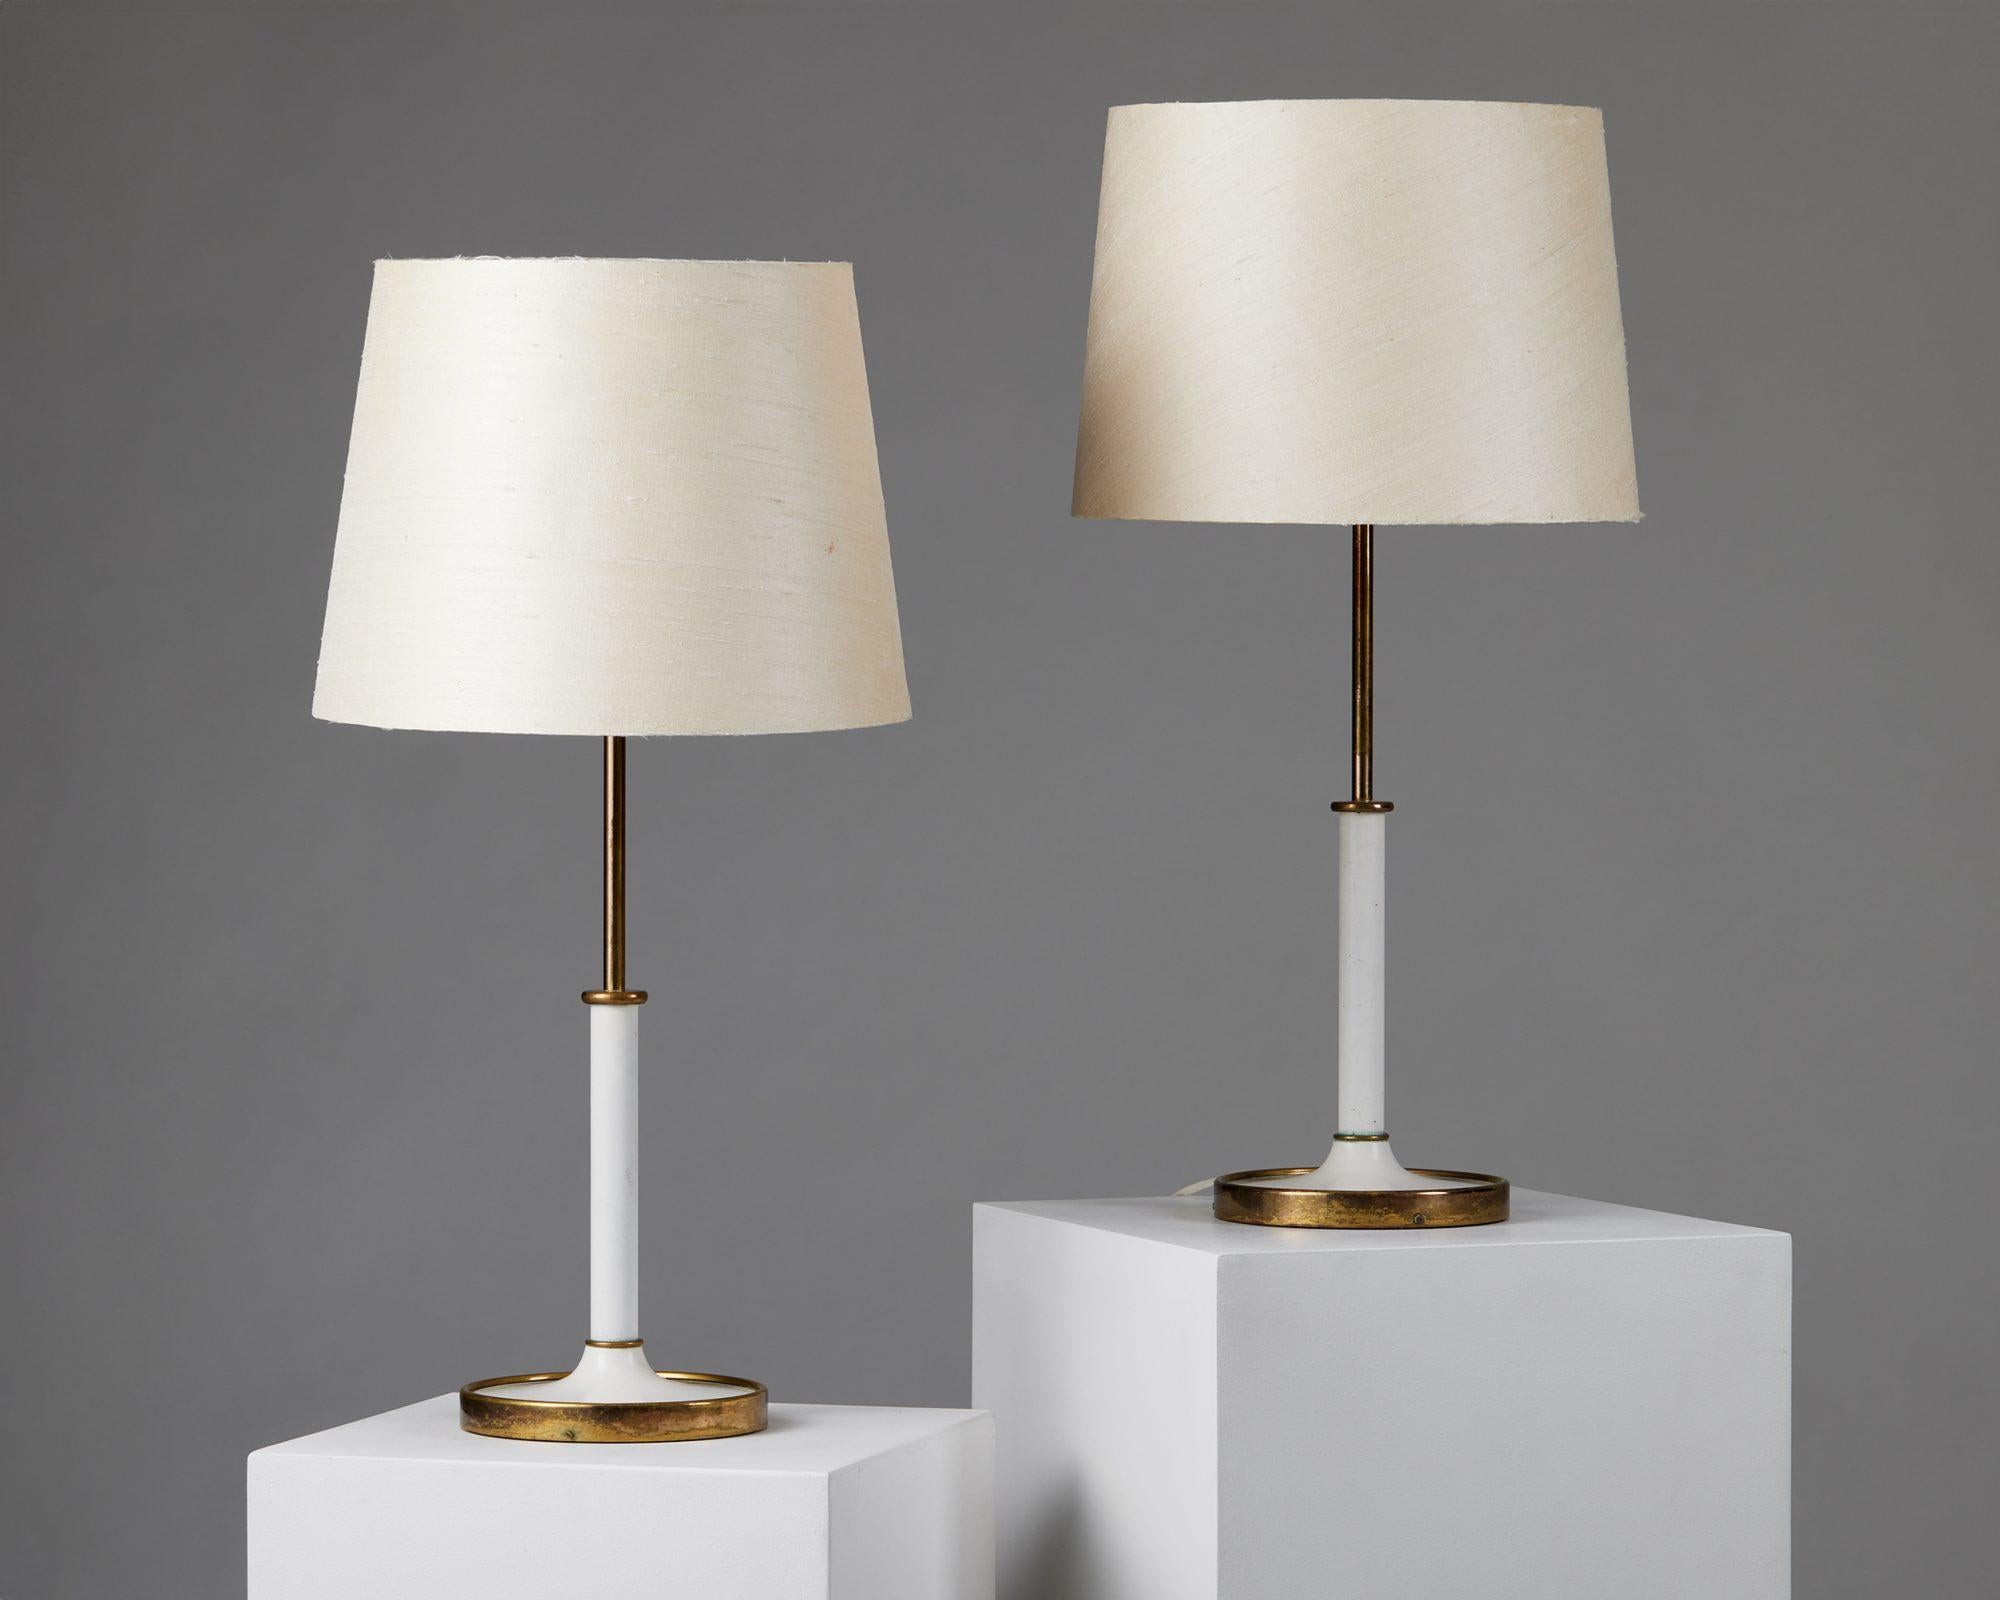 Pair of table lamps model 2466 designed by Josef Frank for Svenskt Tenn,
Sweden, 1950s.

Brass, lacquered brass and original fabric shades.

Stamped.

Josef Frank was a true European, he was also a pioneer of what would become classic 20th century